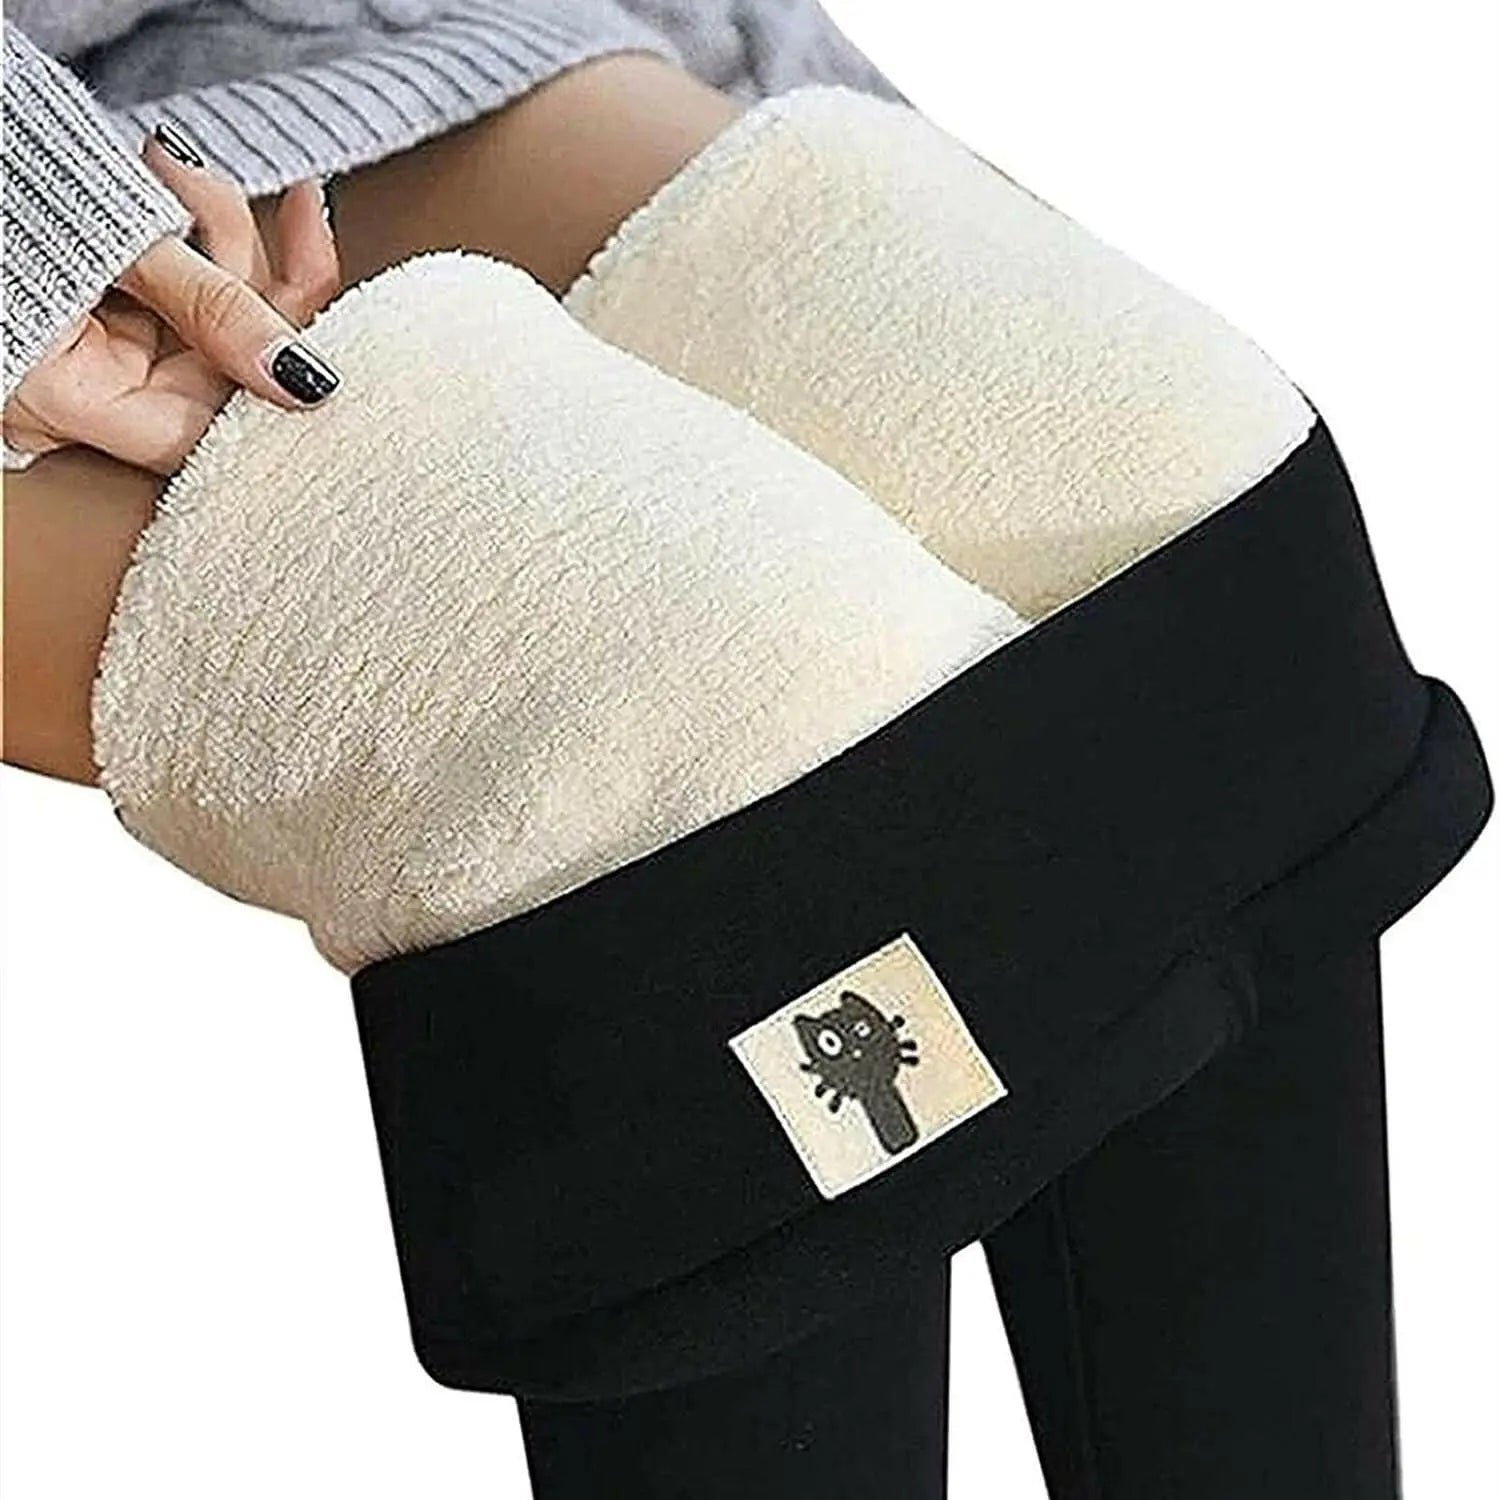 Super Thick Cashmere Leggings for Women, Winter Sherpa Fleece Lined High Waist Stretchy Leggings Plush Warm Thermal Pants